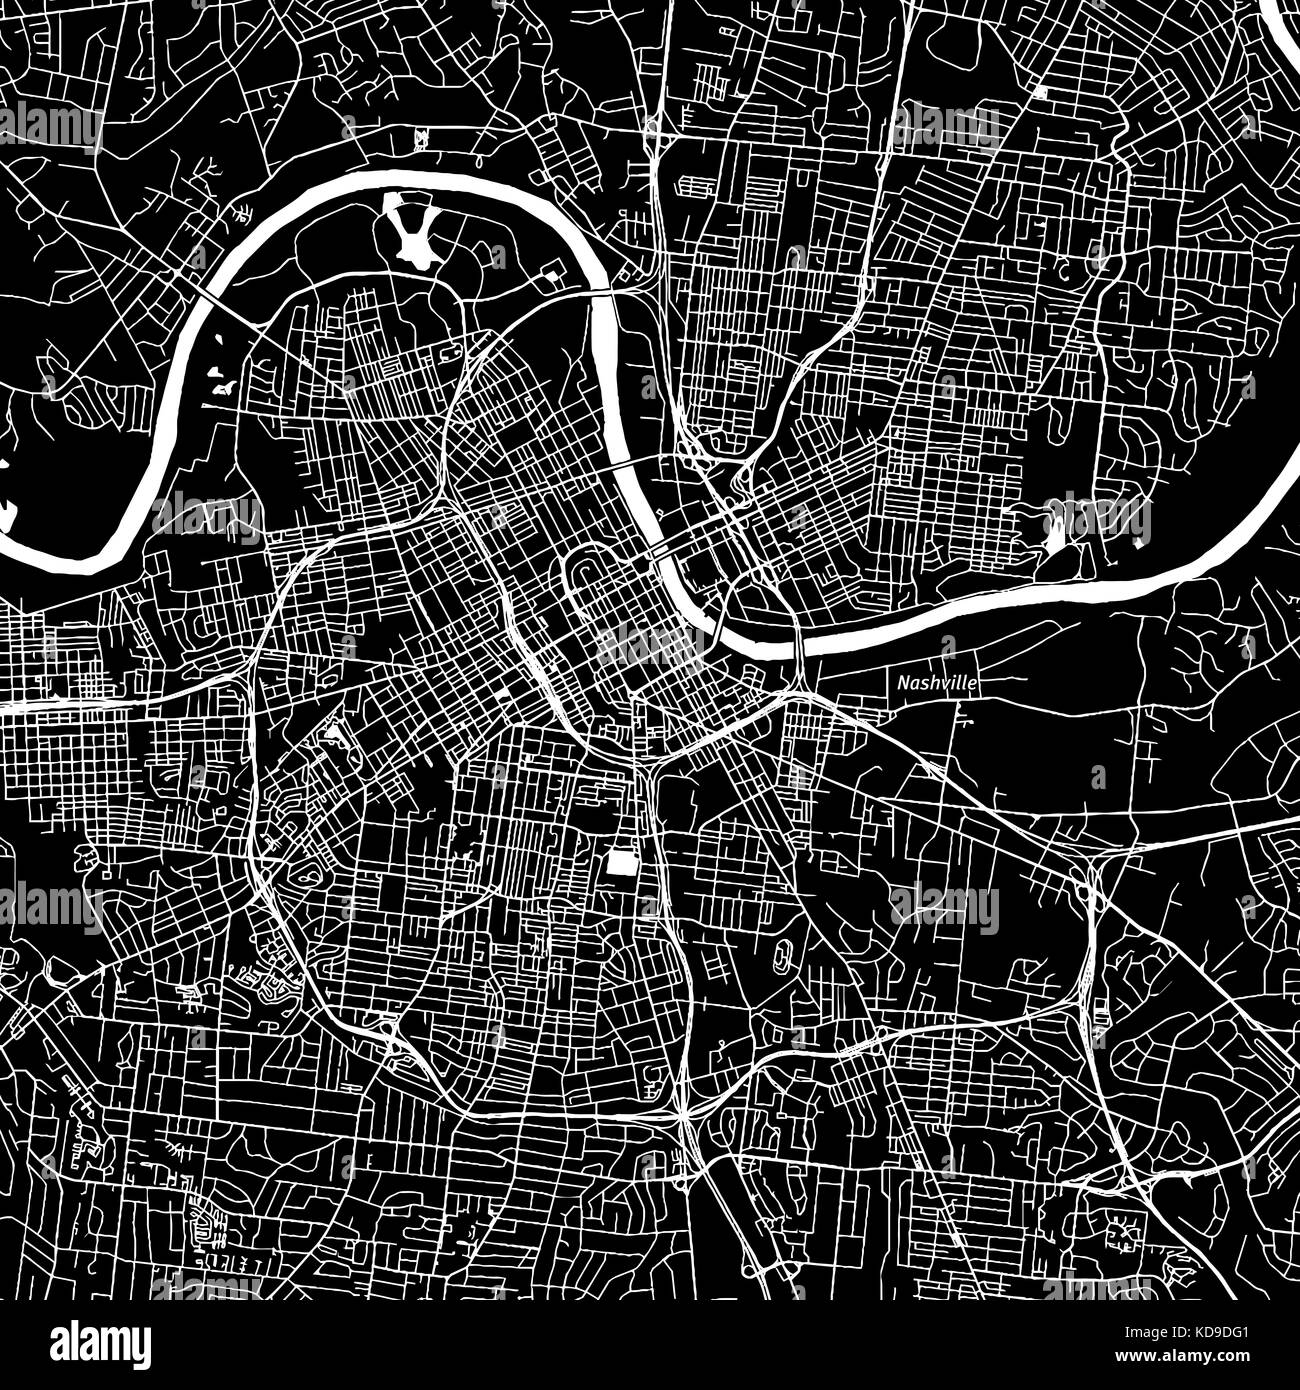 Nashville, Tennessee. Downtown vector map. City name on a separate layer. Art print template. Black and white. Stock Photo